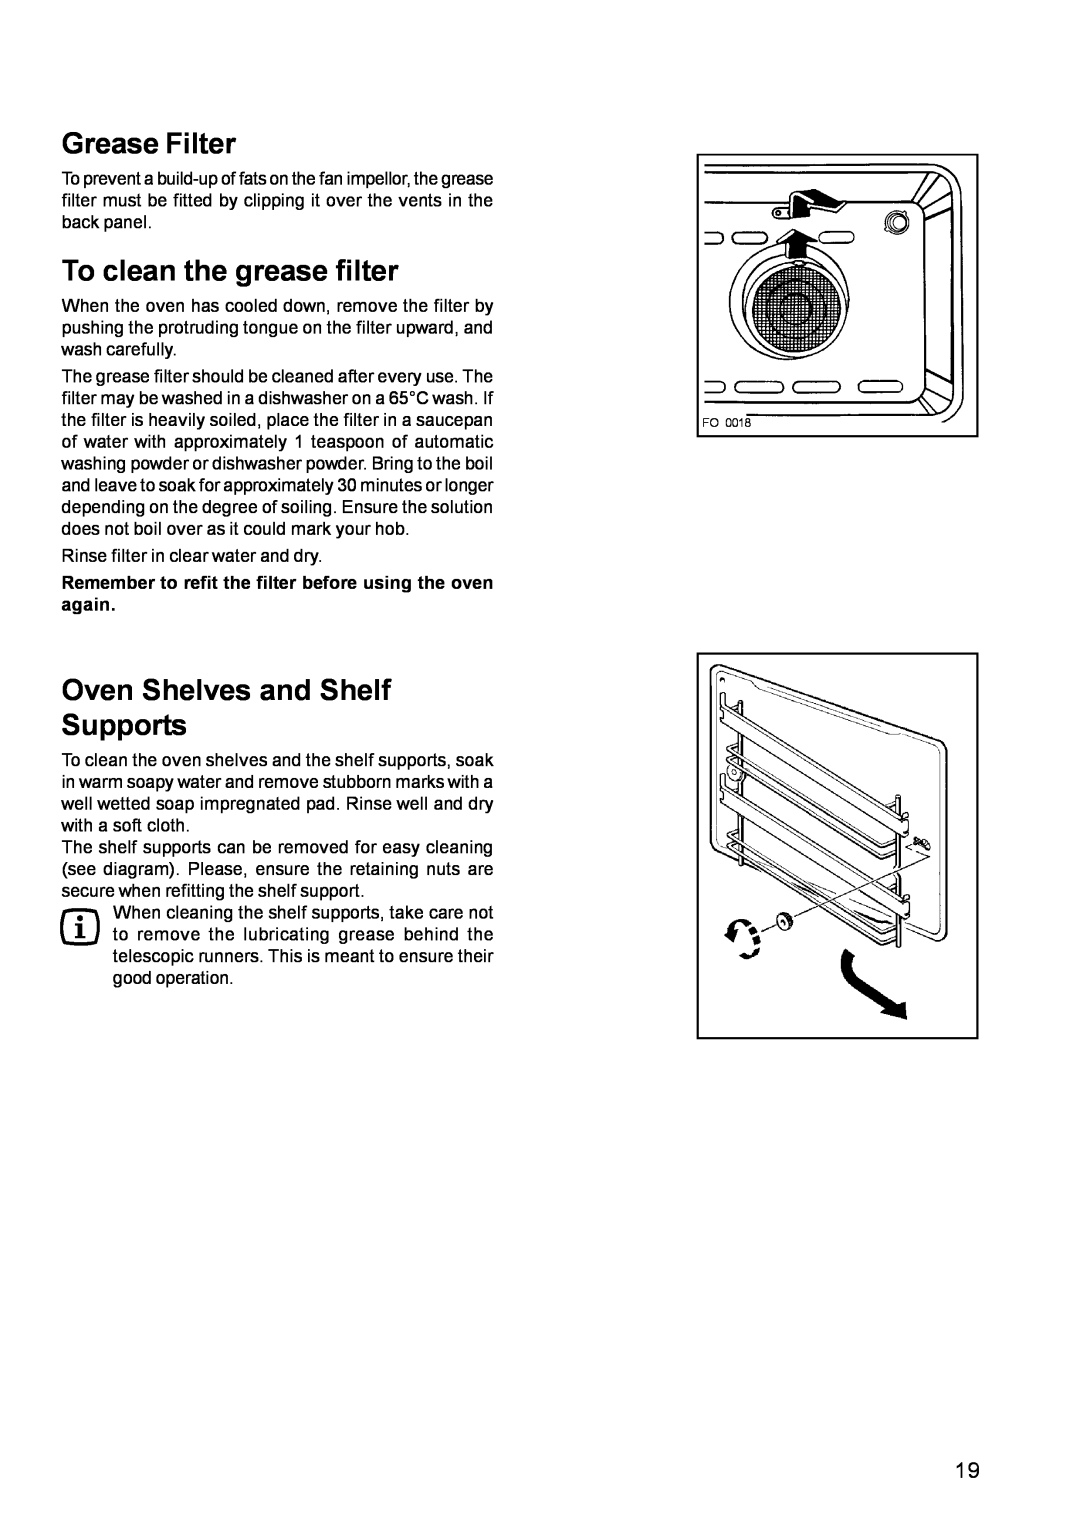 Zanussi ZCE 700 manual Grease Filter, To clean the grease filter, Oven Shelves and Shelf Supports 